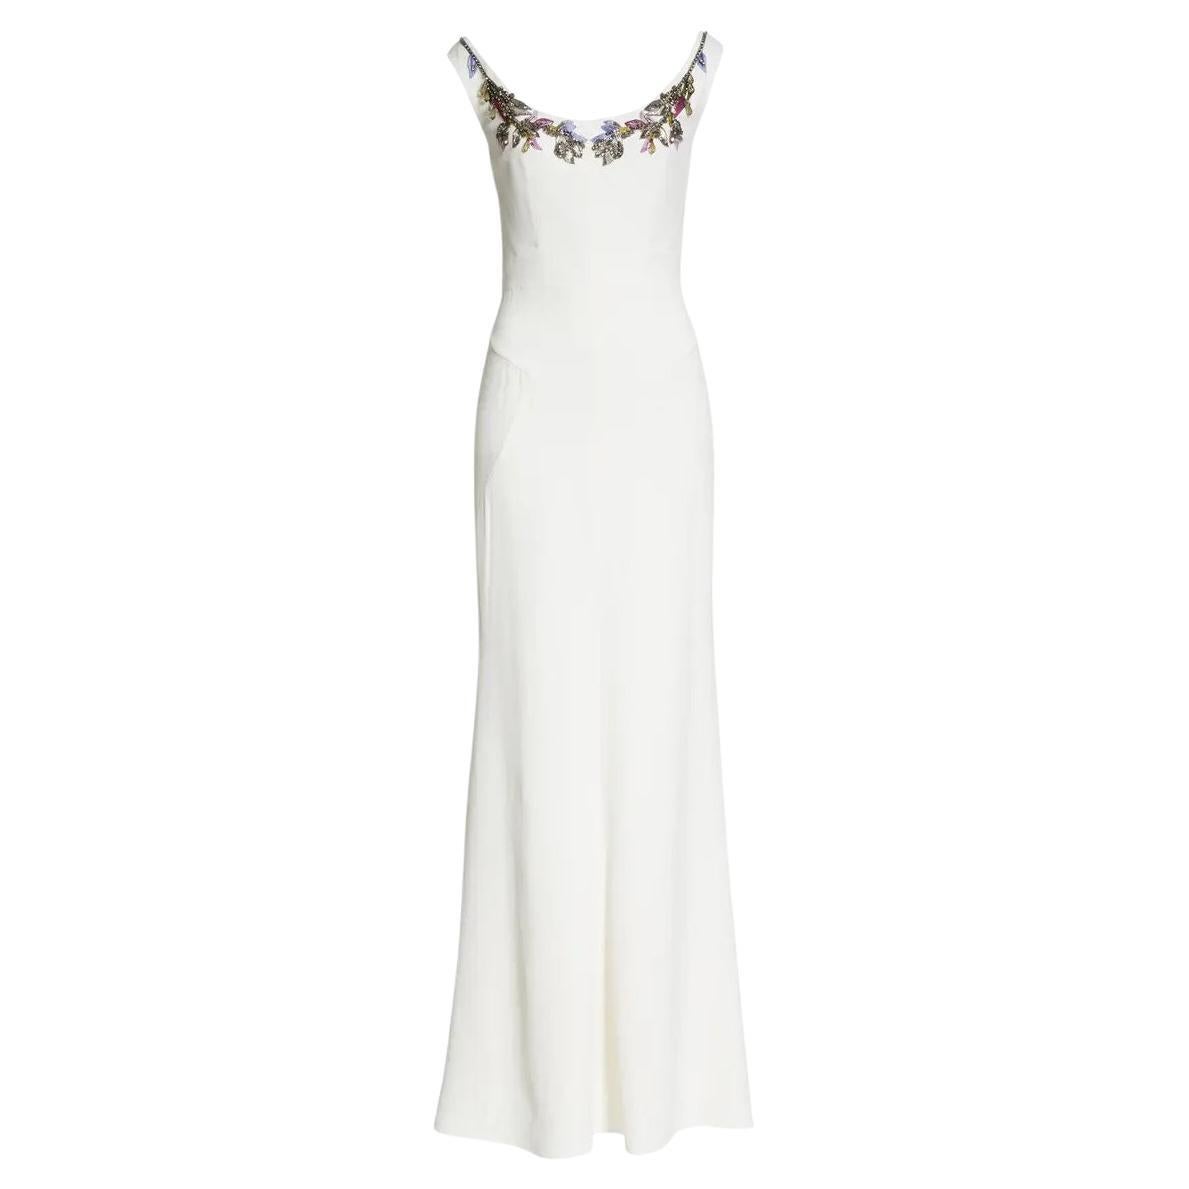 Alexander McQueen Crystal Embellished Crepe Sheath Gown in White NWT